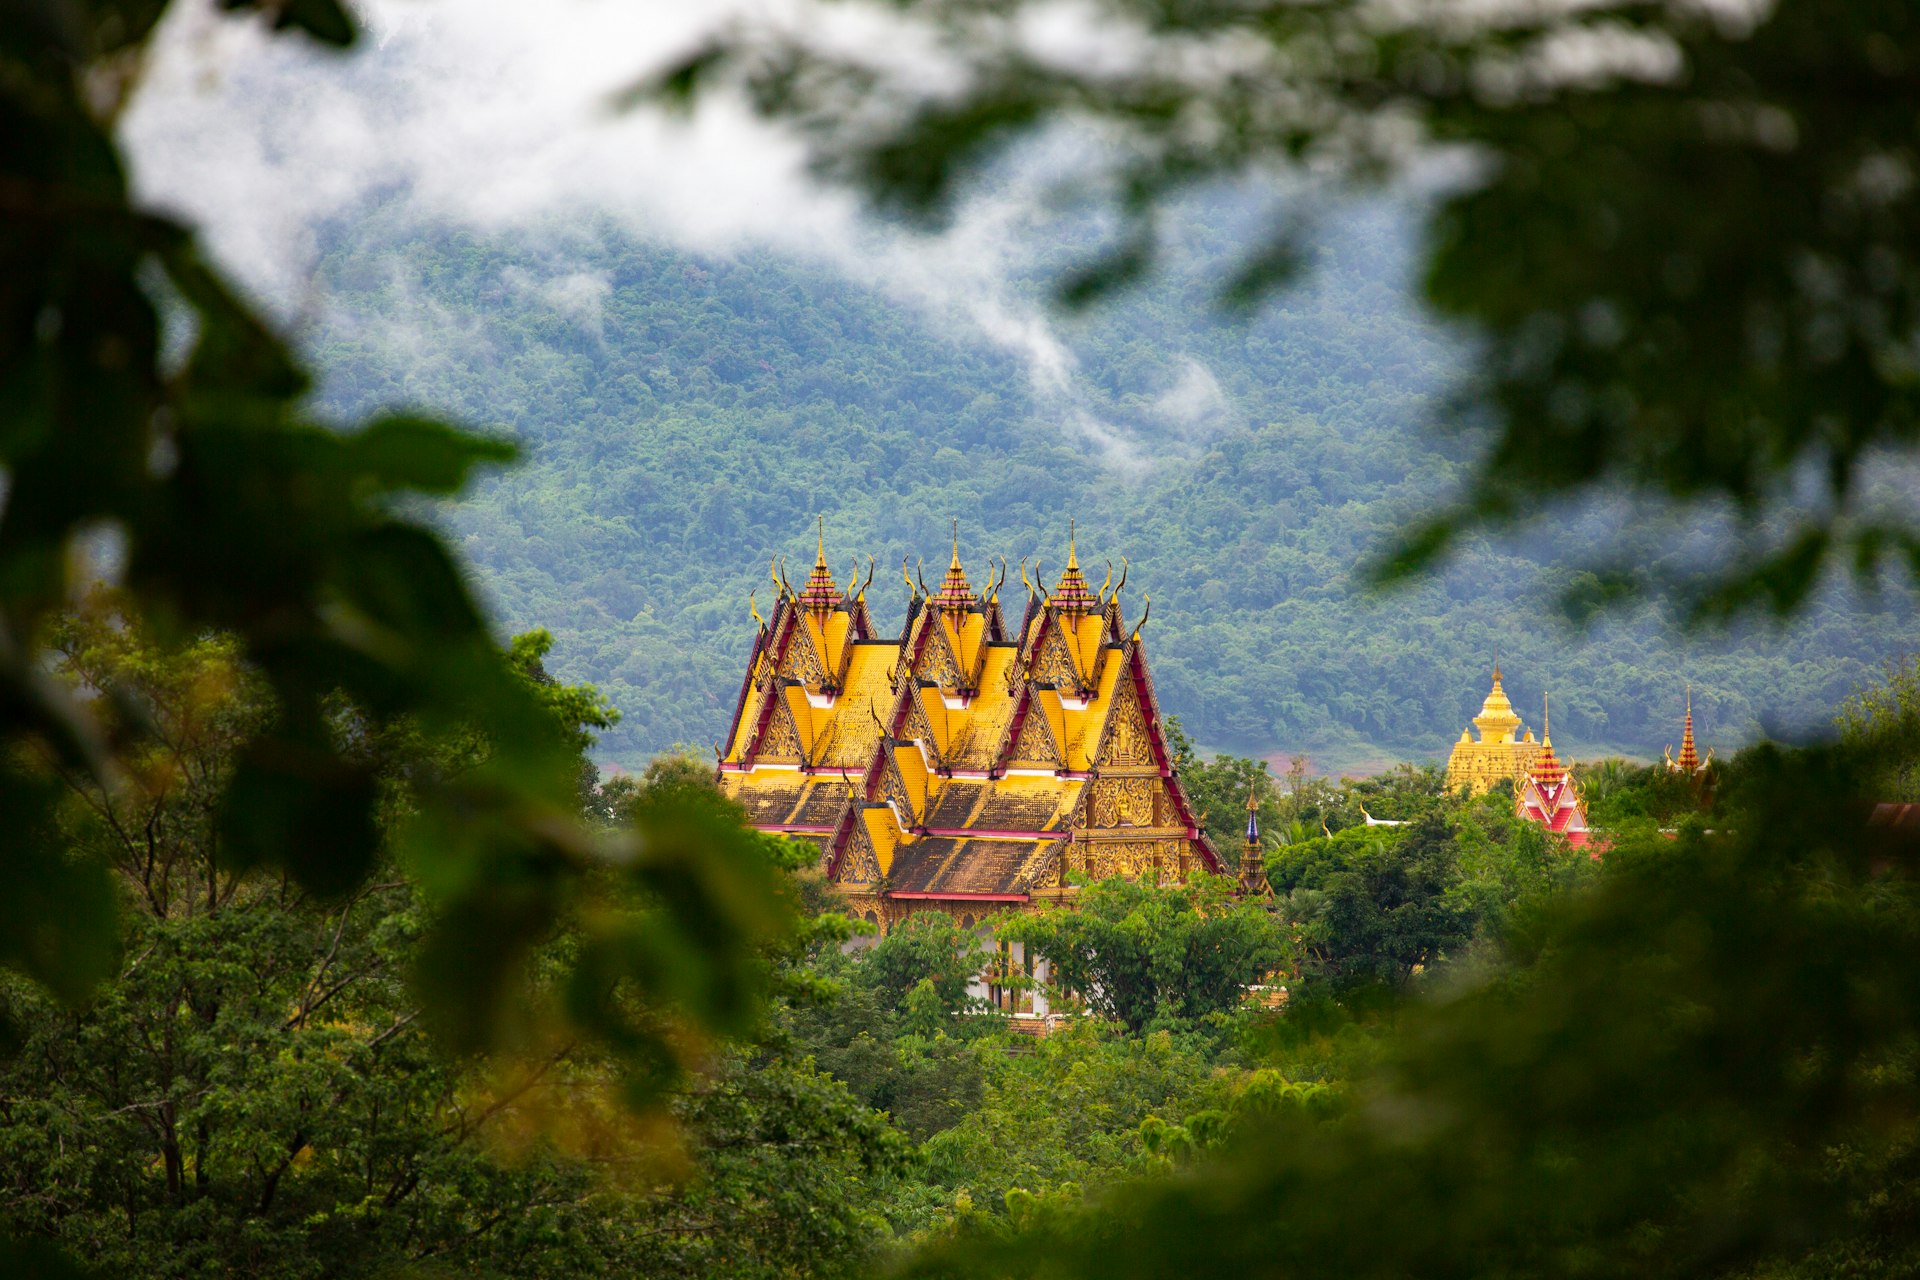 Sangkhlaburi Scenic View - Wat Wang Wiwekaram Temple (and Jedi Buddhakaya in the background) in the valley of tropical rainforest and low lying cloud in Sangkhlaburi.